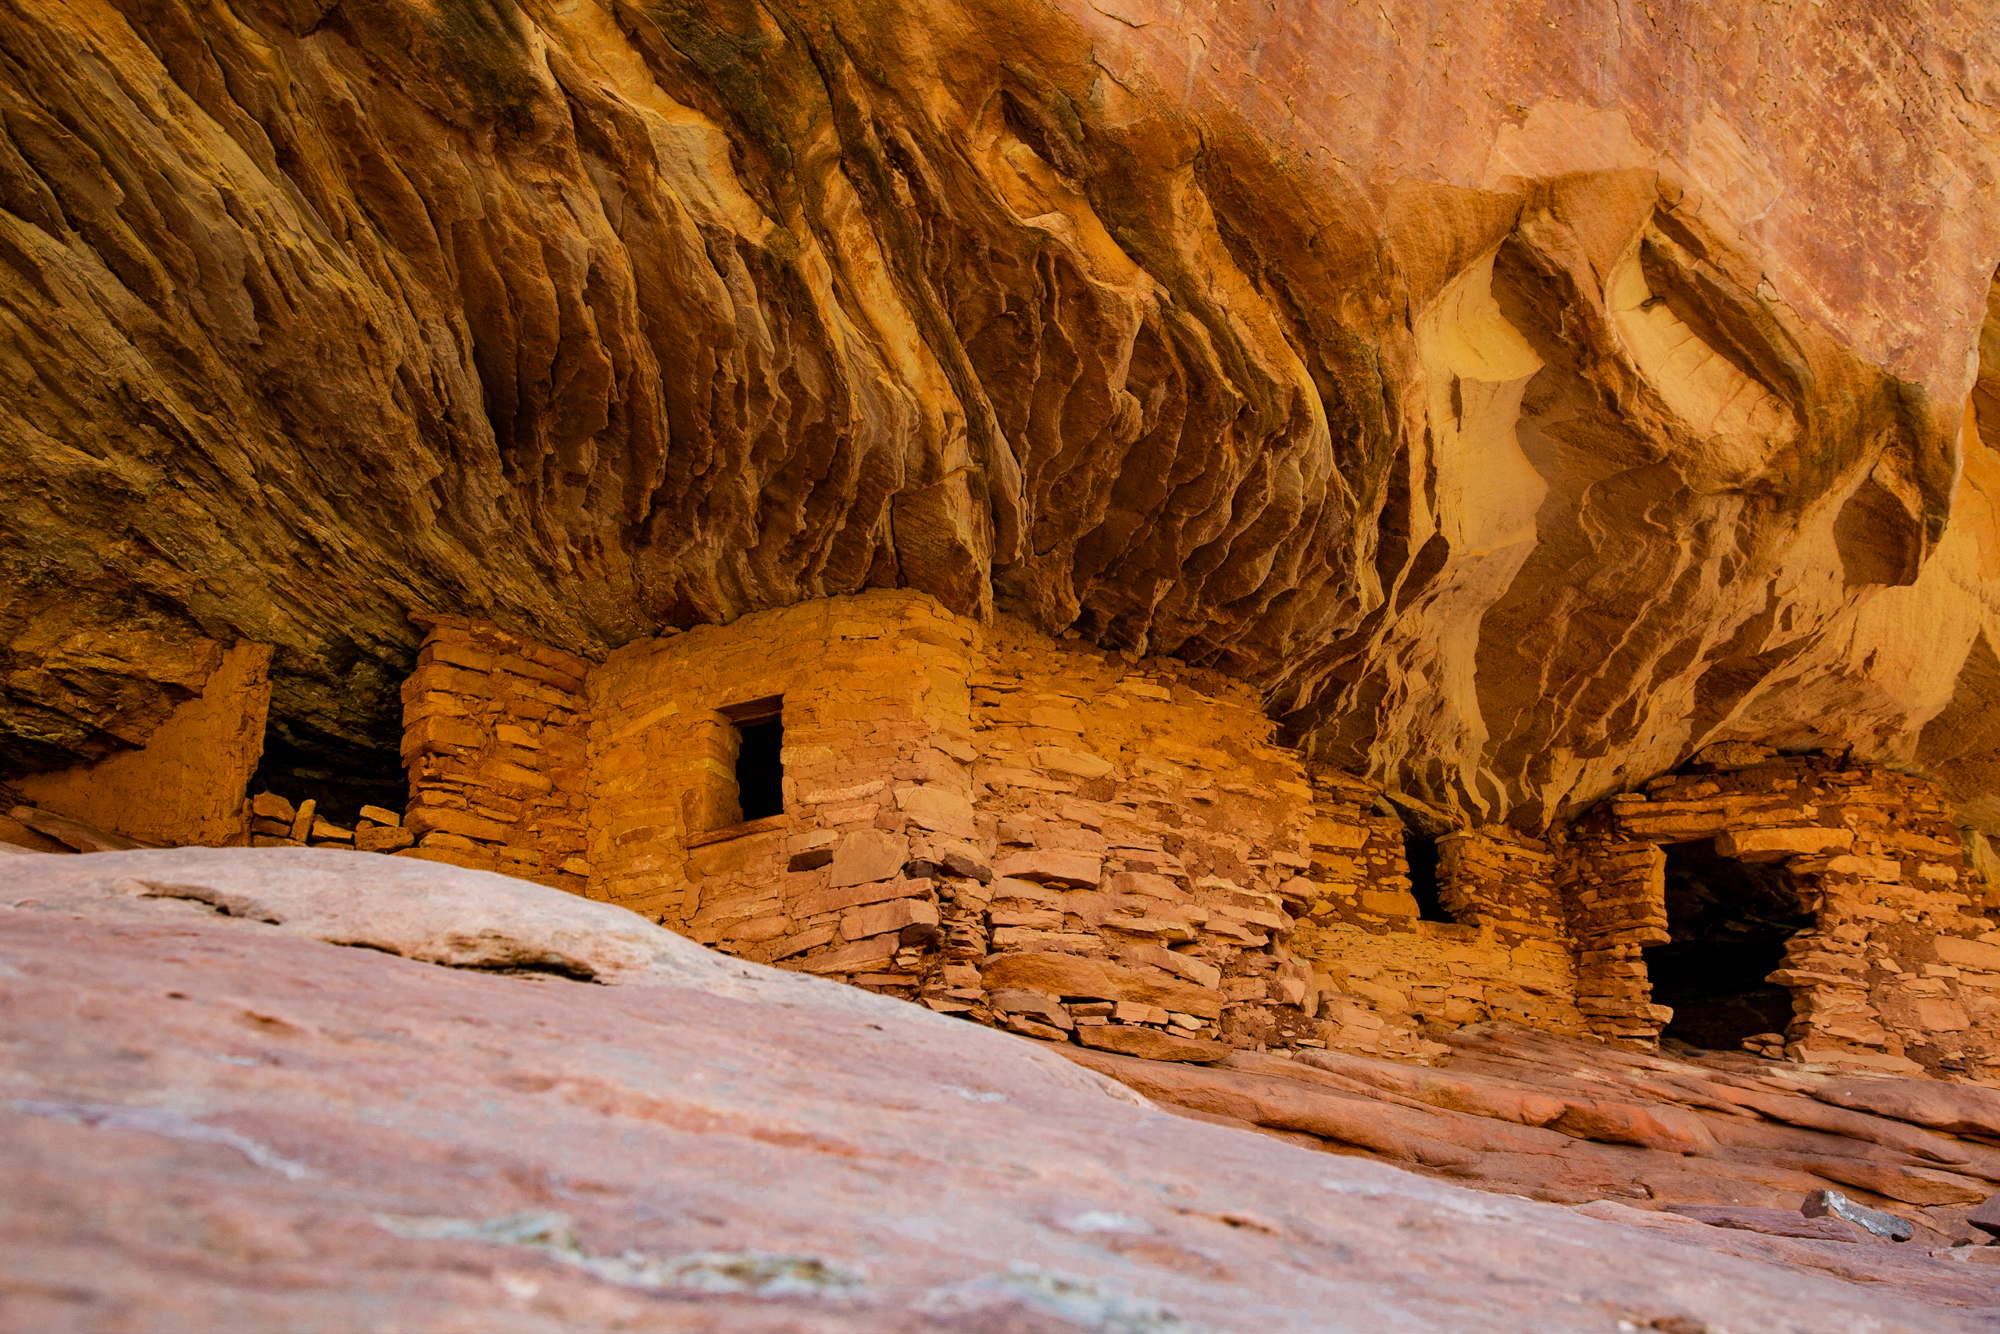 House On Fire & Cave Tower, Mule Canyon